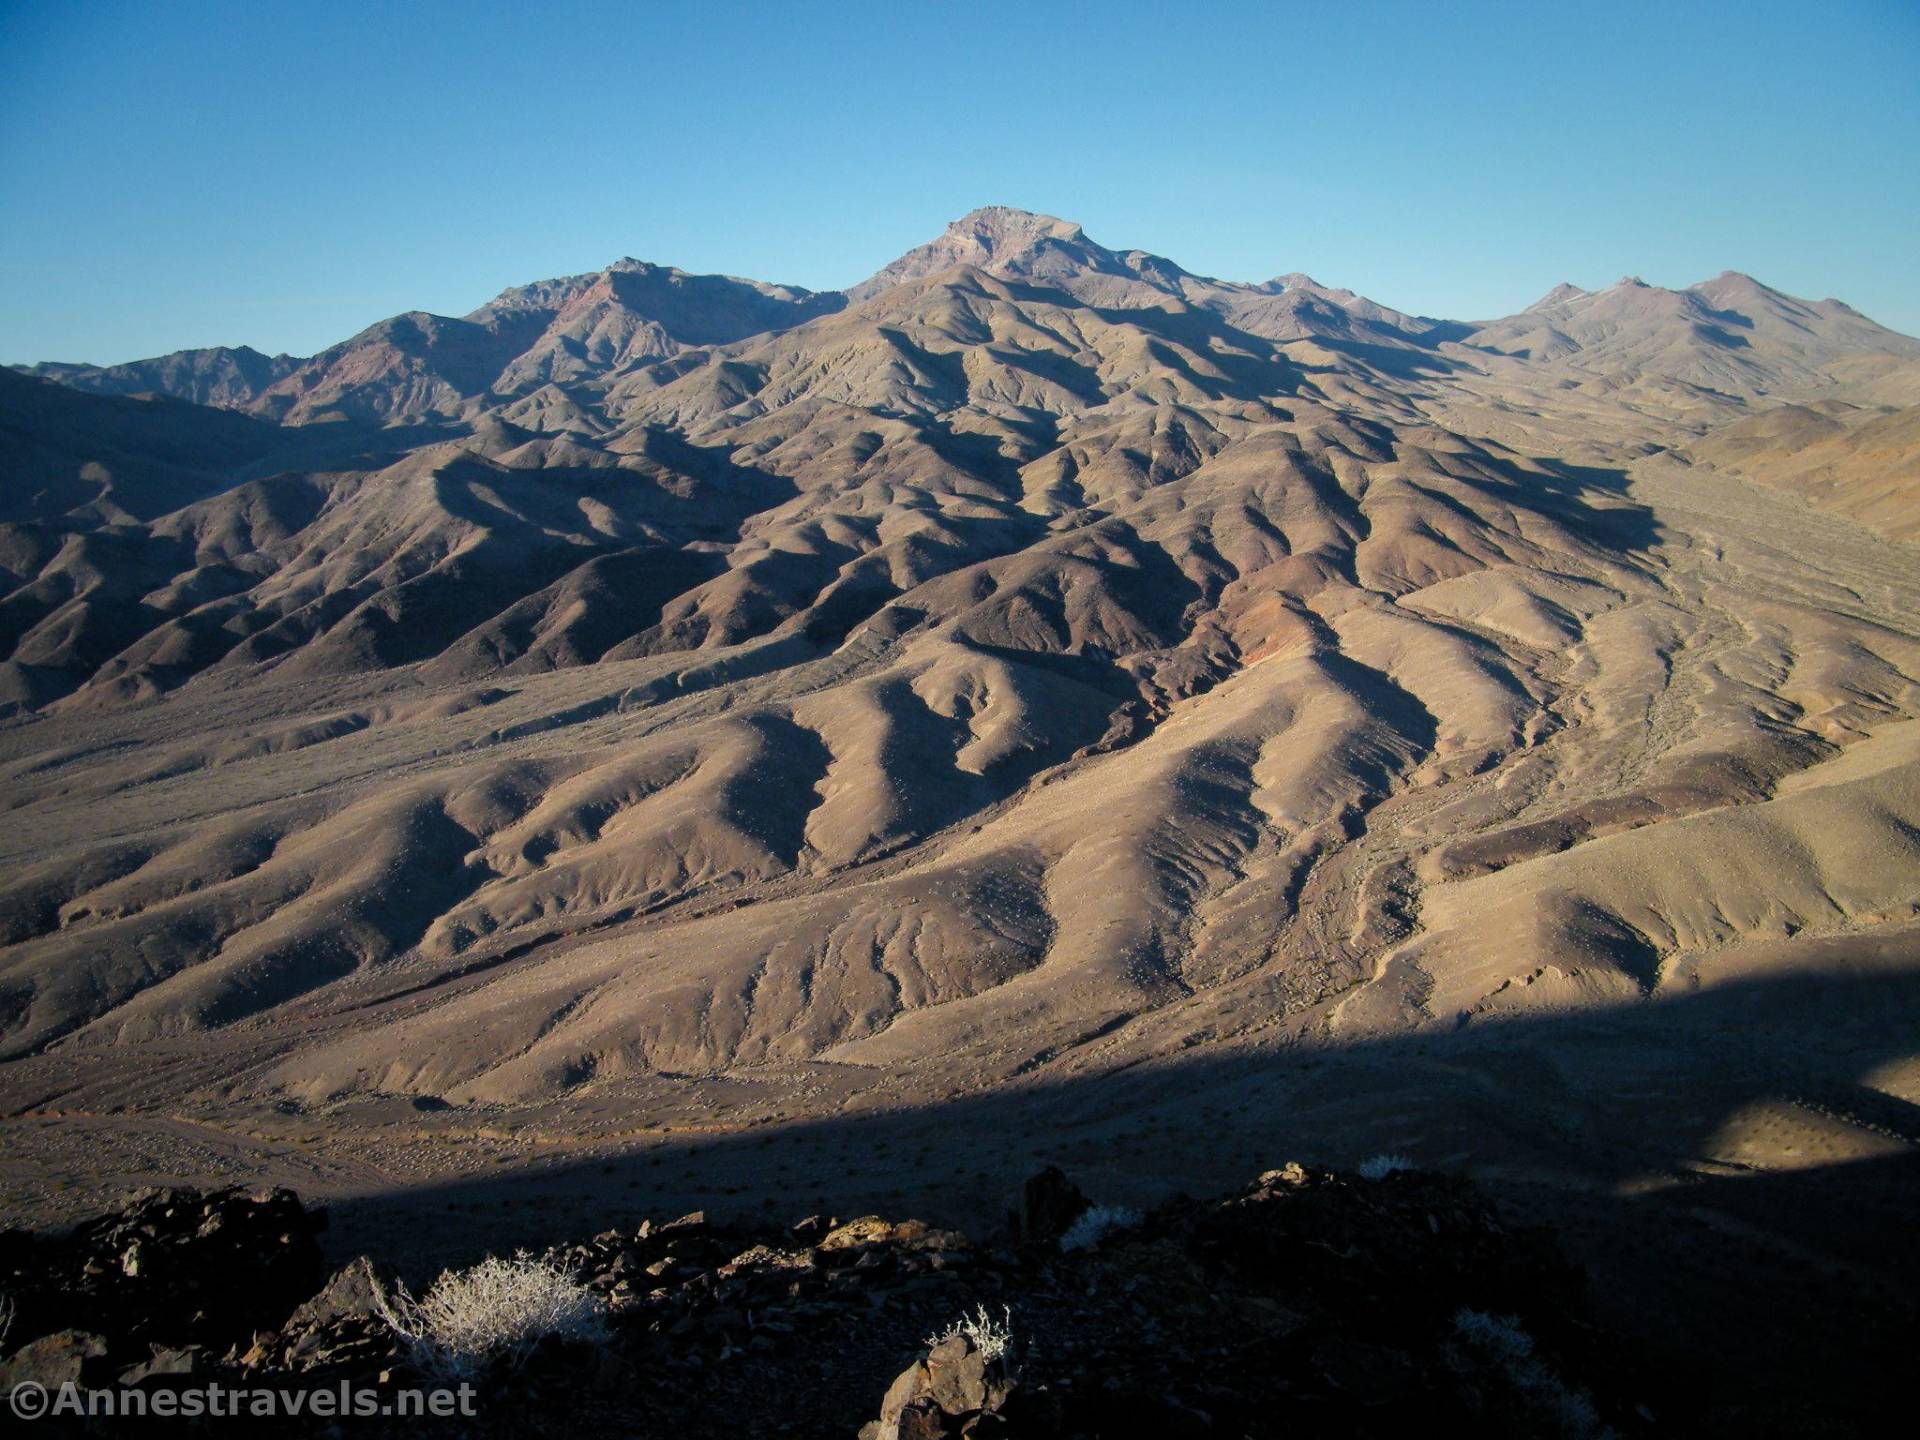 Corkscrew Peak from the Death Valley Buttes, Death Valley National Park, California